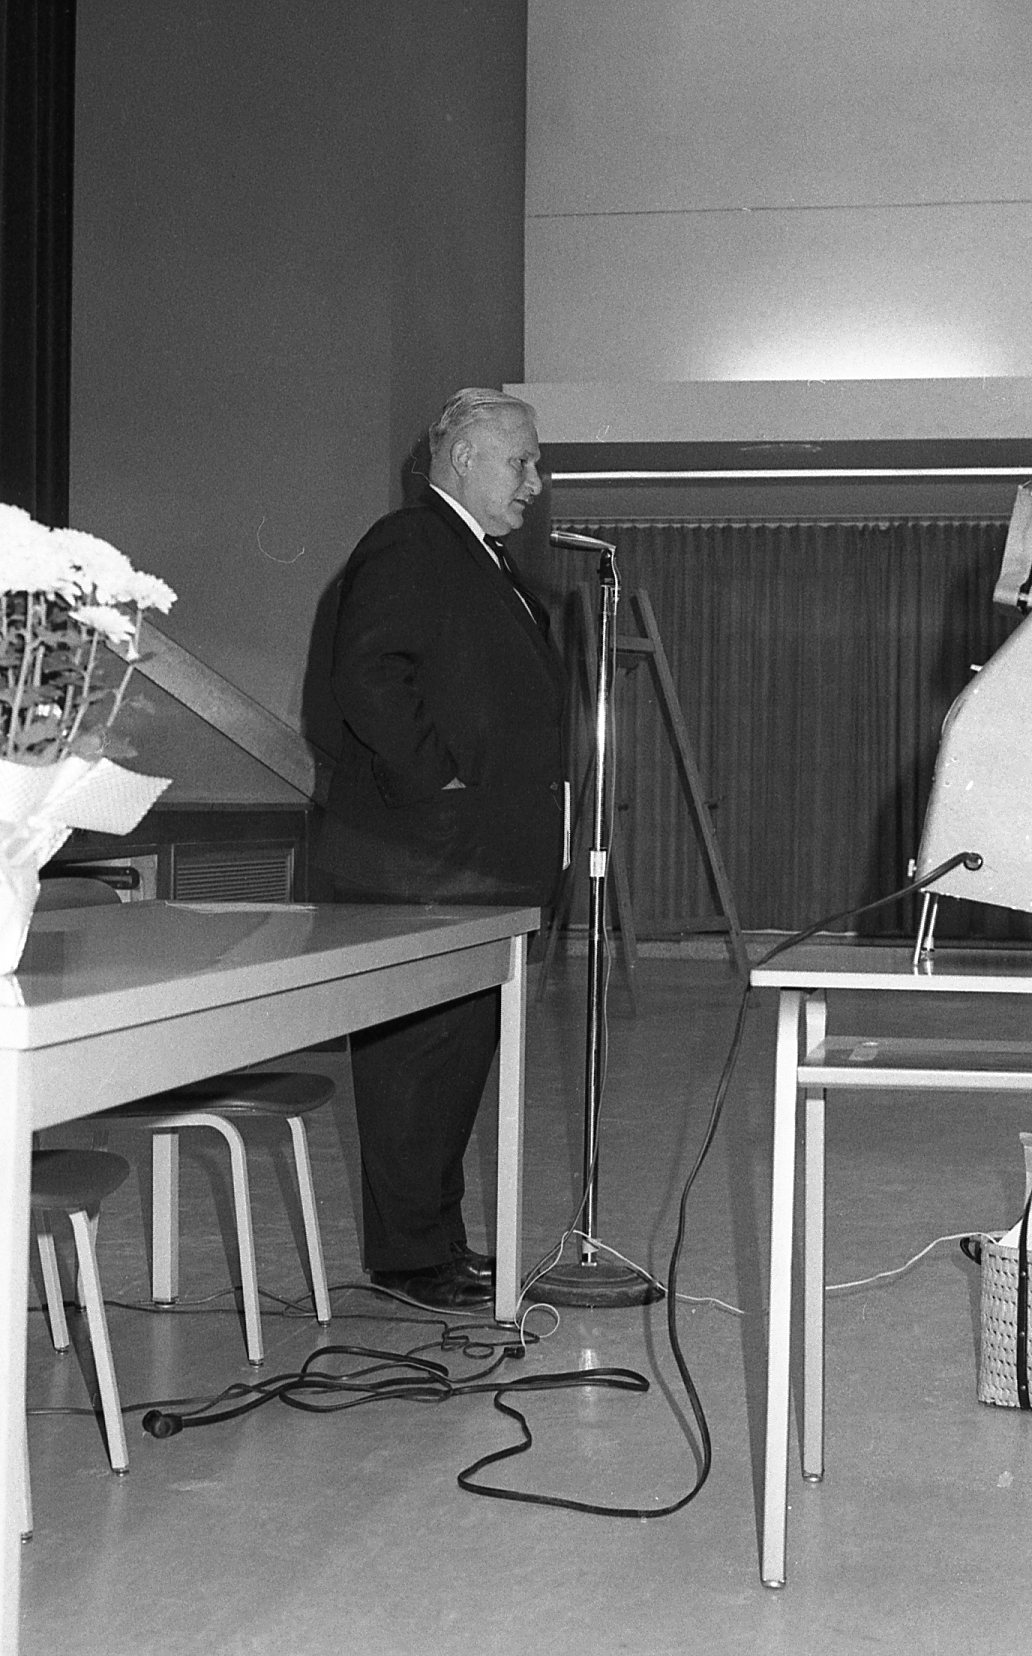 Charles Proctor (Principal of Finch Avenue East Public School in the late 1950s) addresses the crowd (Photo: Bill Chambers)